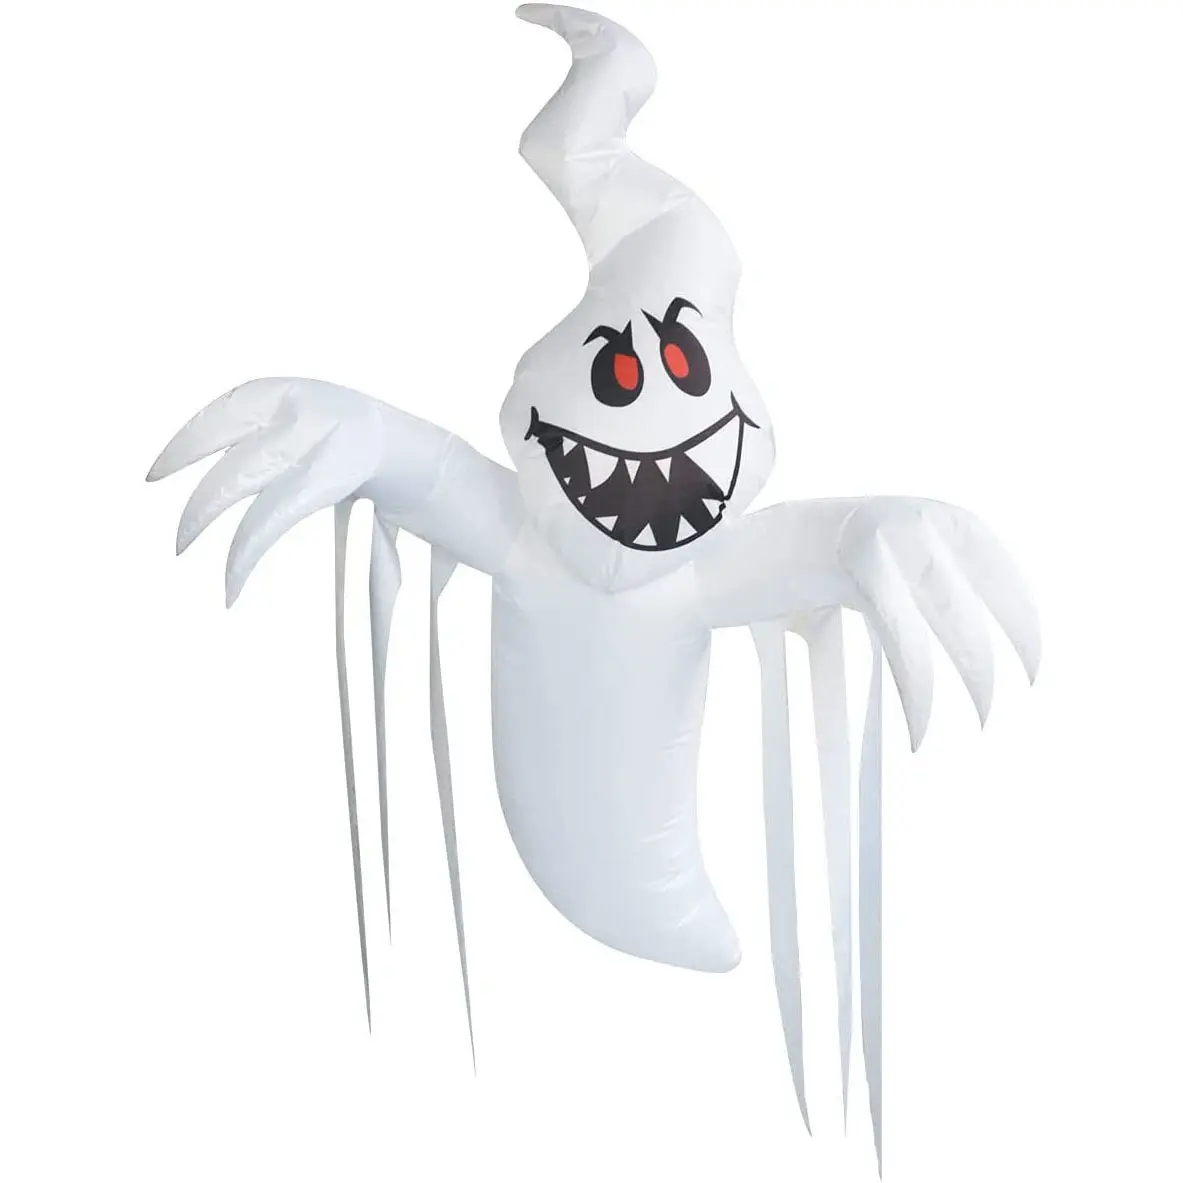 Built-in Colorful Flashing LED Light Yard Decoration for Holiday/Party/Yard/Garden 3.6 Feet High Halloween Inflatable Ghost